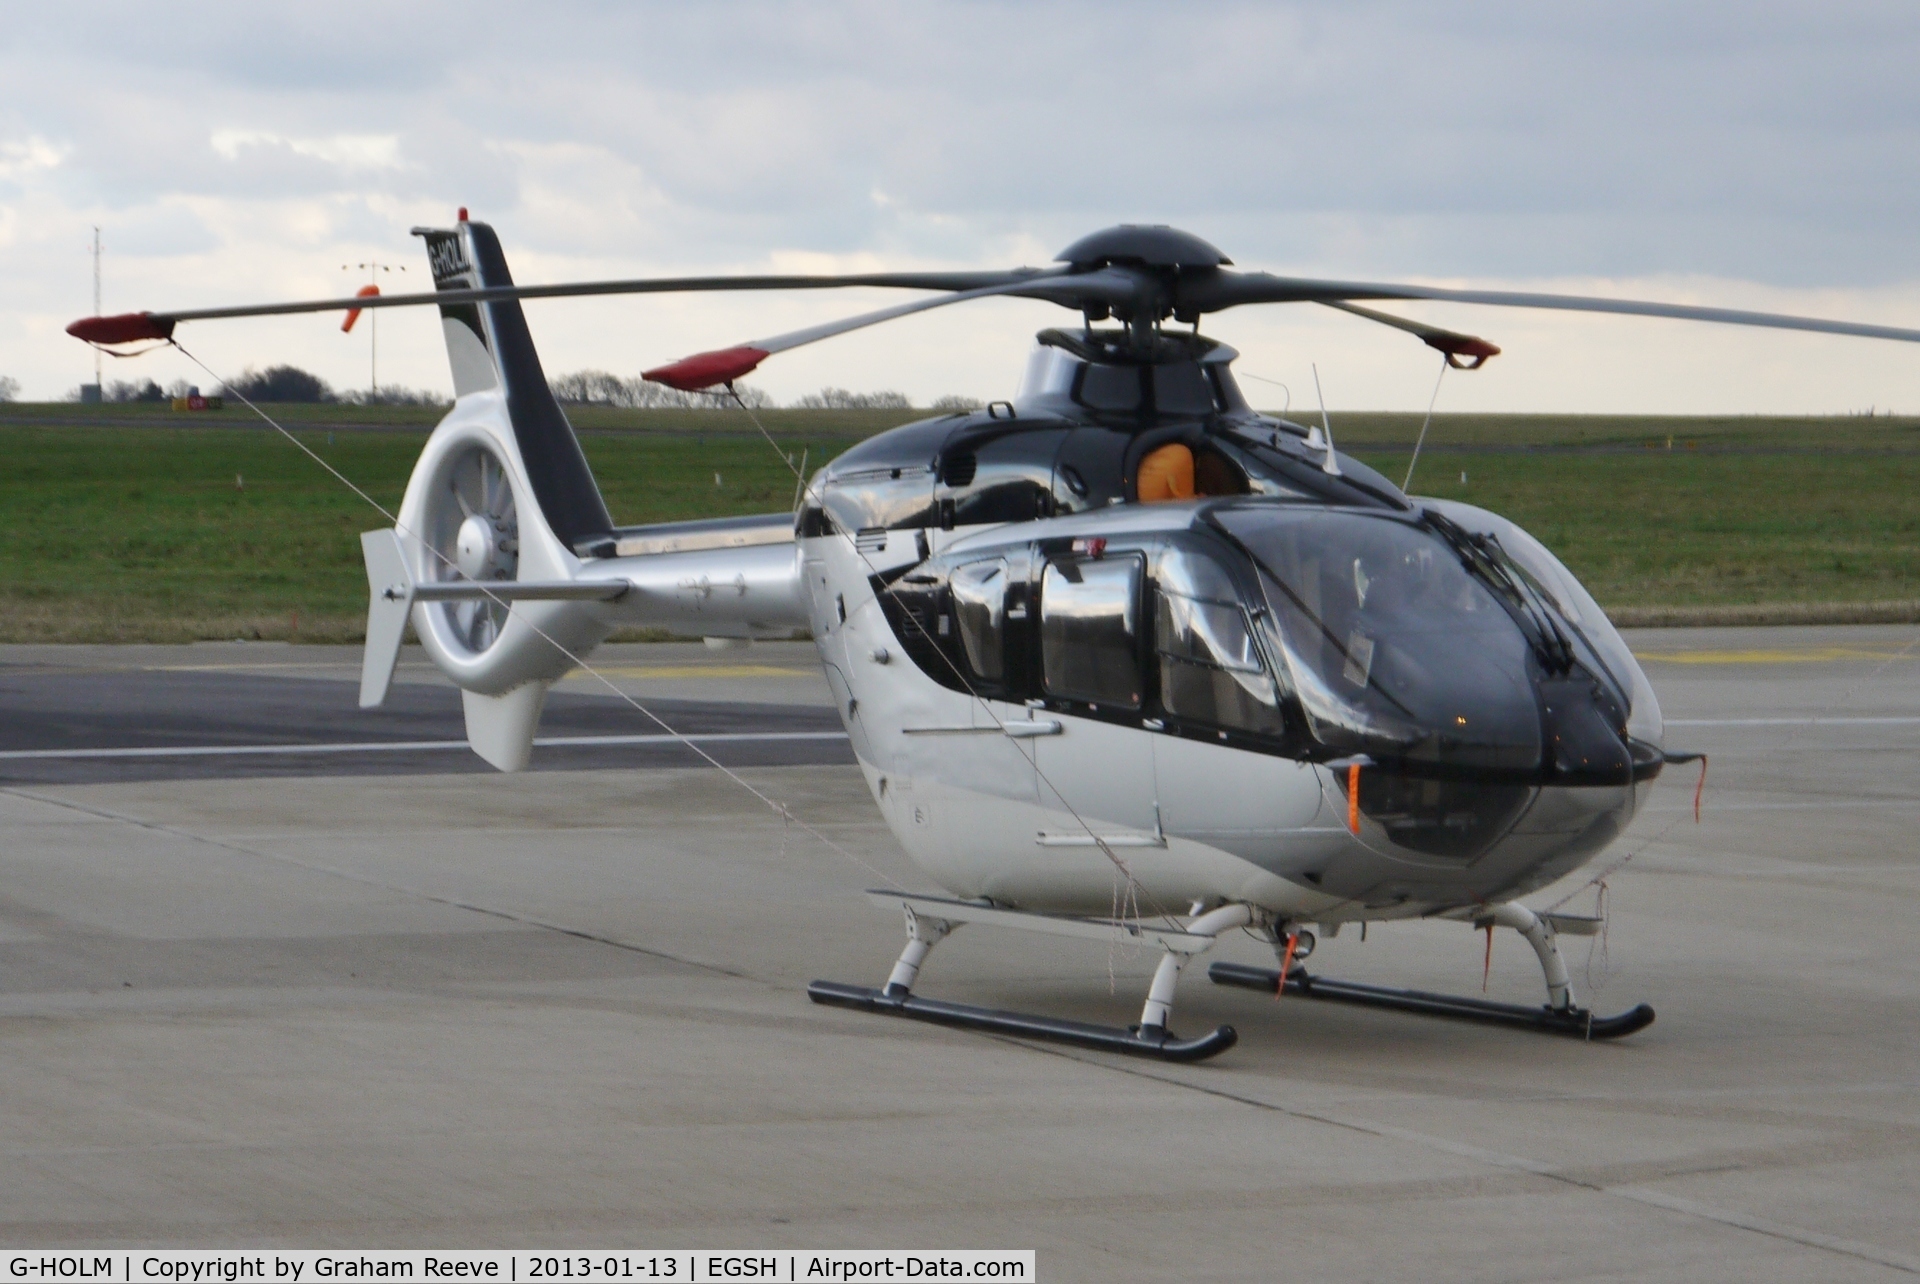 G-HOLM, 2007 Eurocopter EC-135T-2+ C/N 0574, Parked at Norwich.